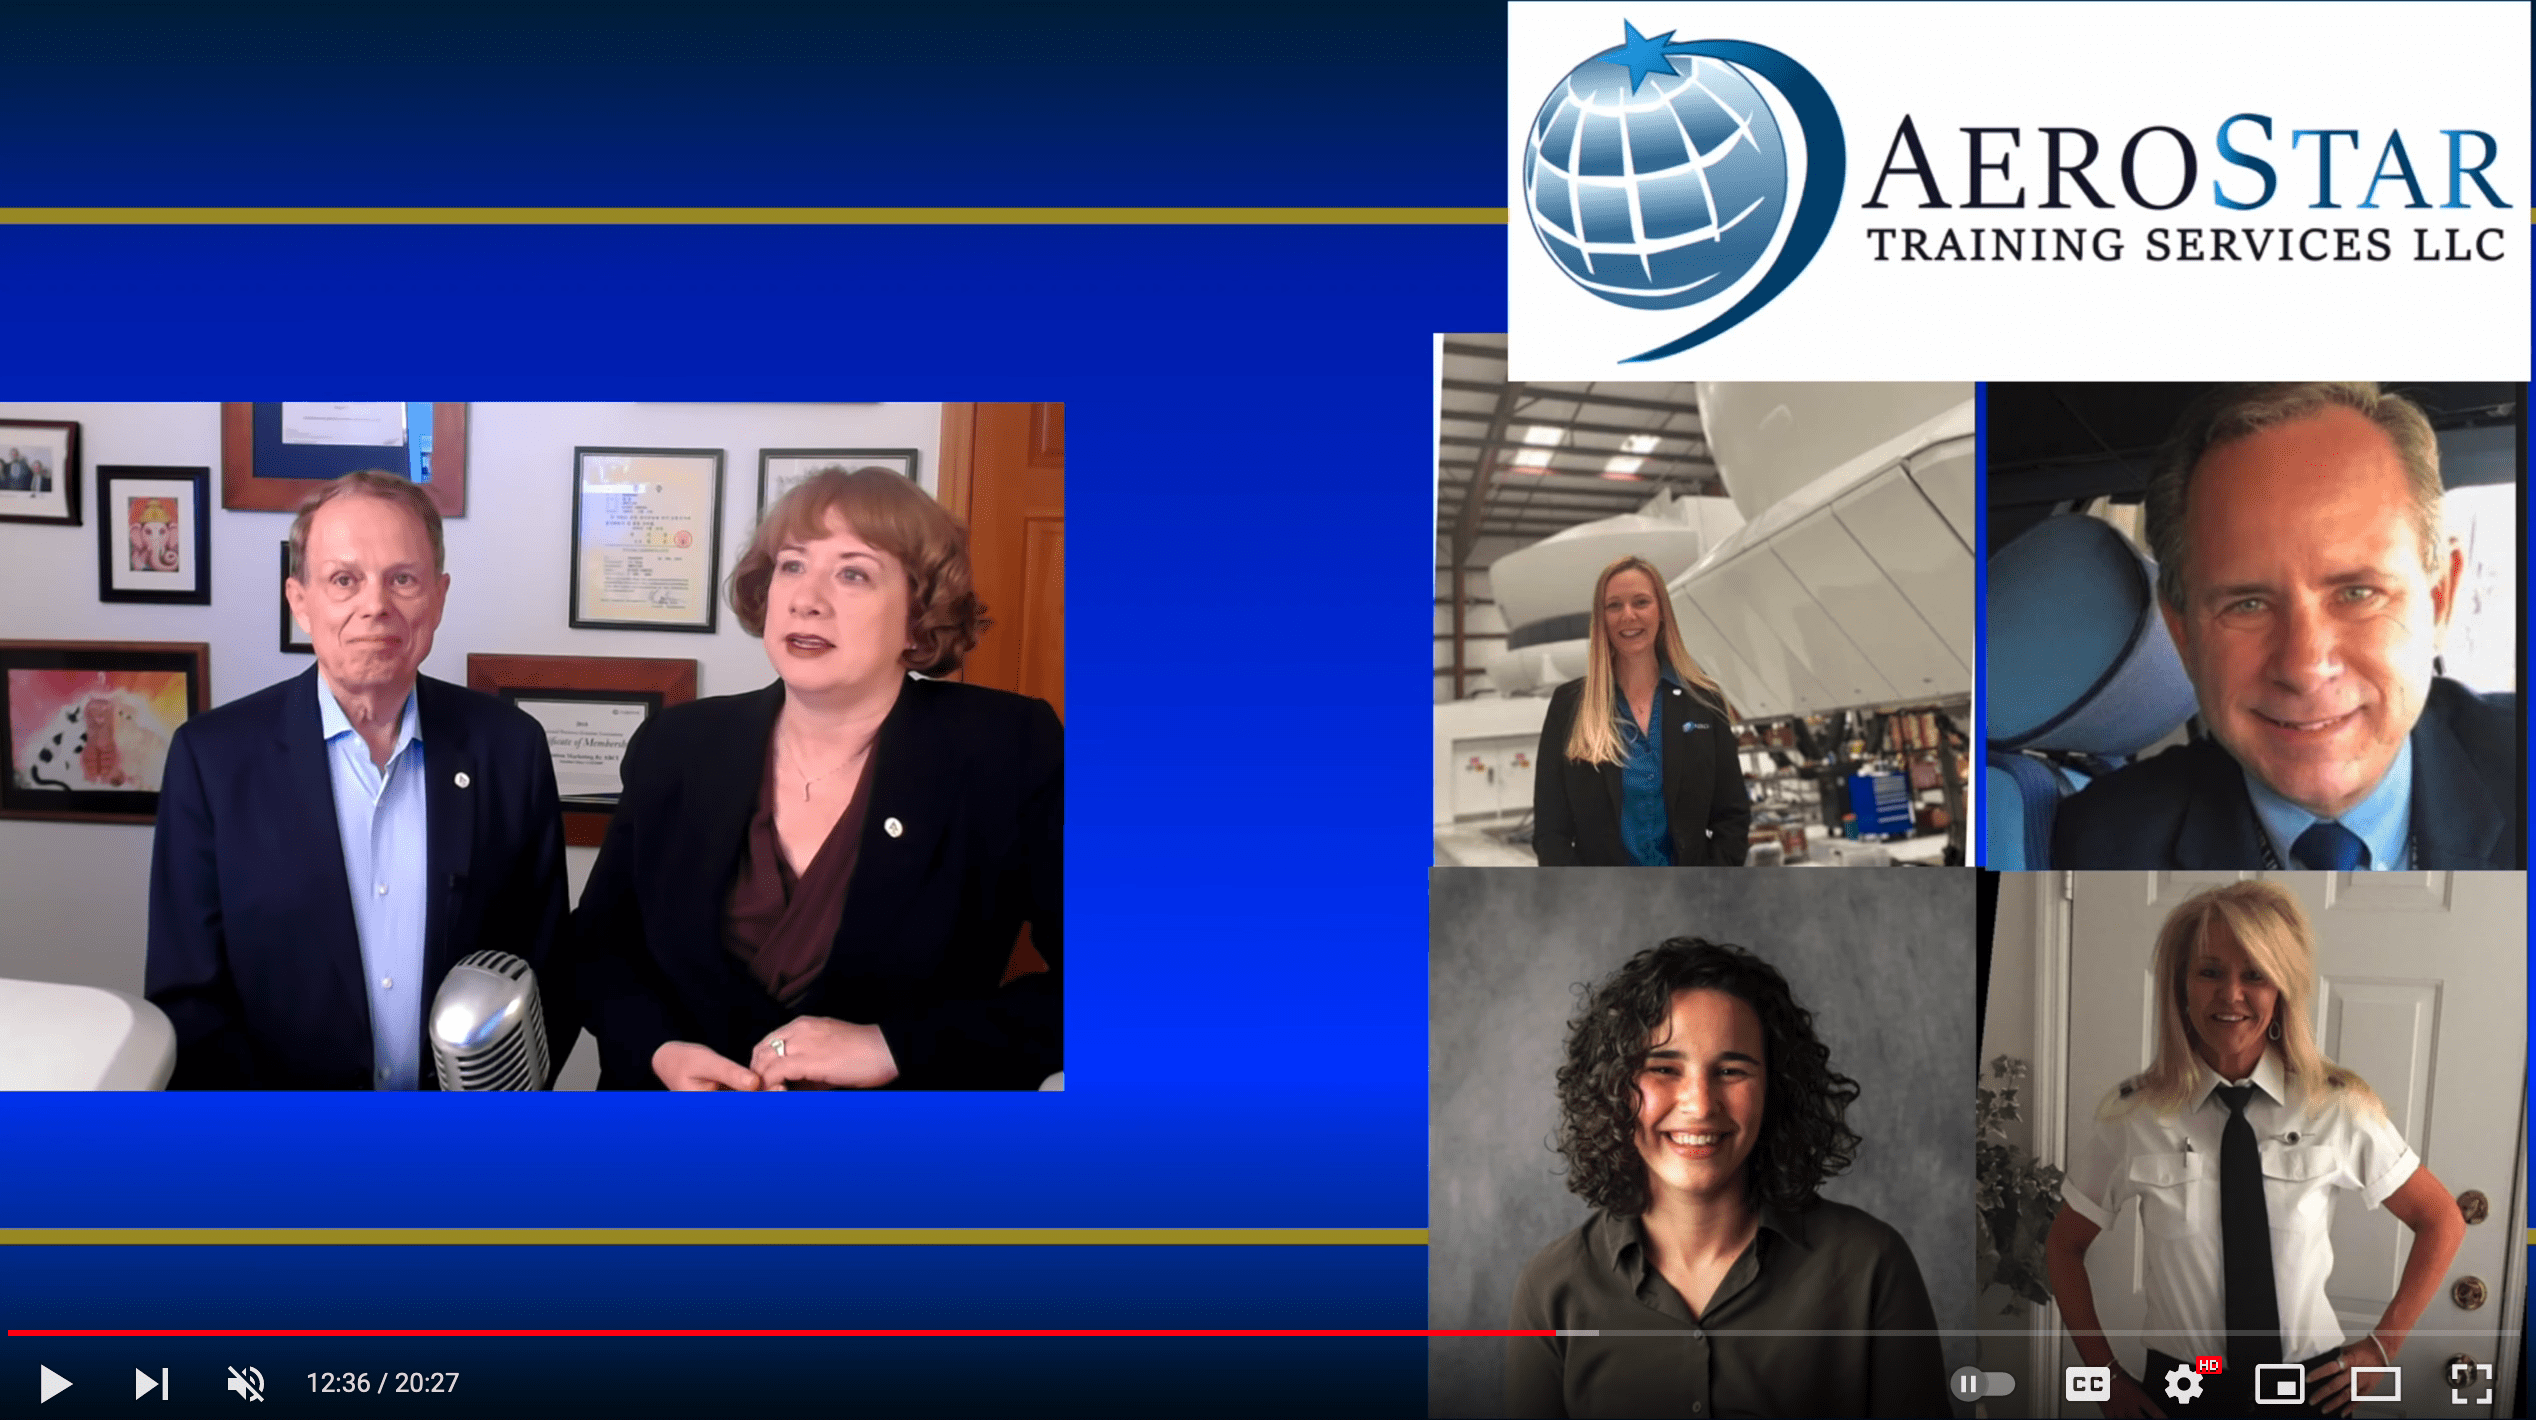 Aerostar Training Services has been an ABCI client for TEN YEARS! We've enjoyed working with with David Santo and Deidra Wilson, and more recently Sherrie Harvey and Michelle Laraki.